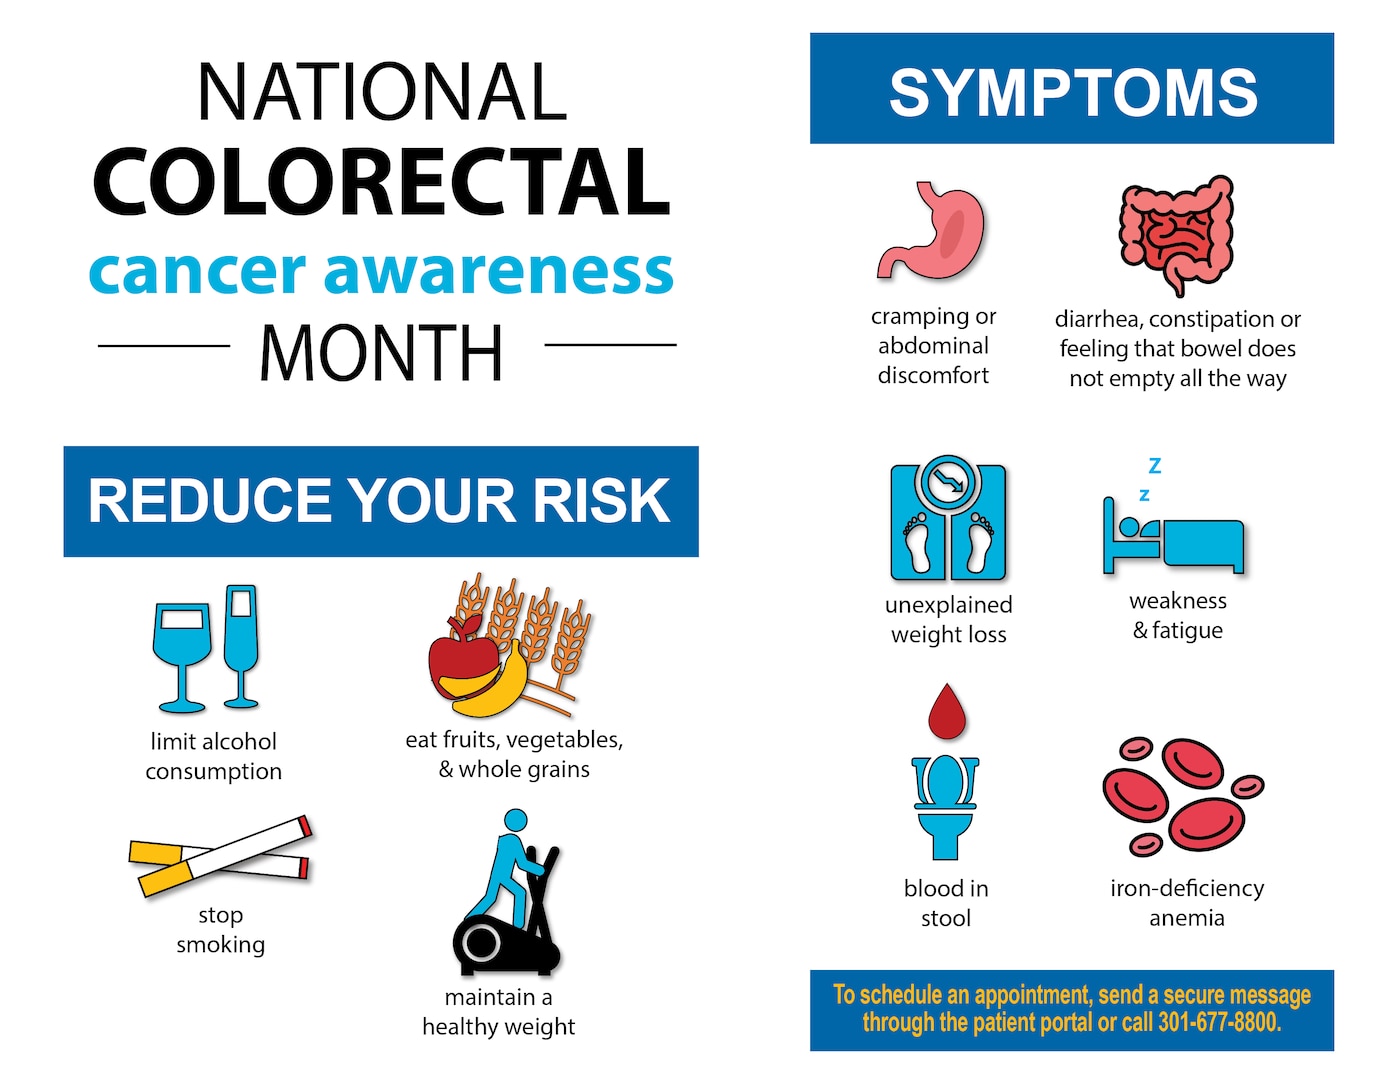 National Colorectal Cancer Awareness Month in March emphasizes the importance of knowing the signs and symptoms of colorectal cancer and methods of risk reduction.